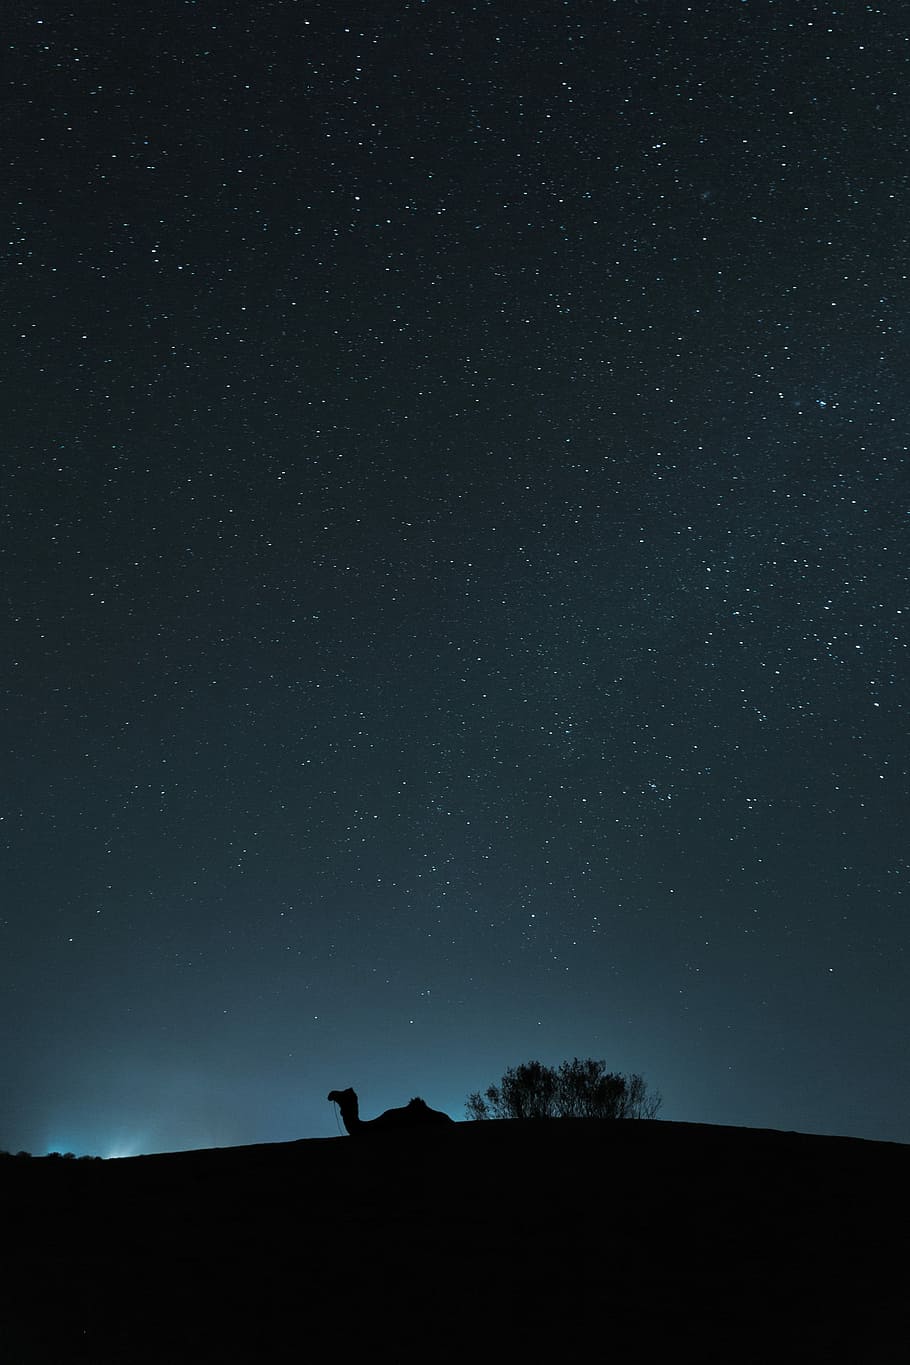 CamelScape, camel silhouette at night, star, sky, sillhoutte